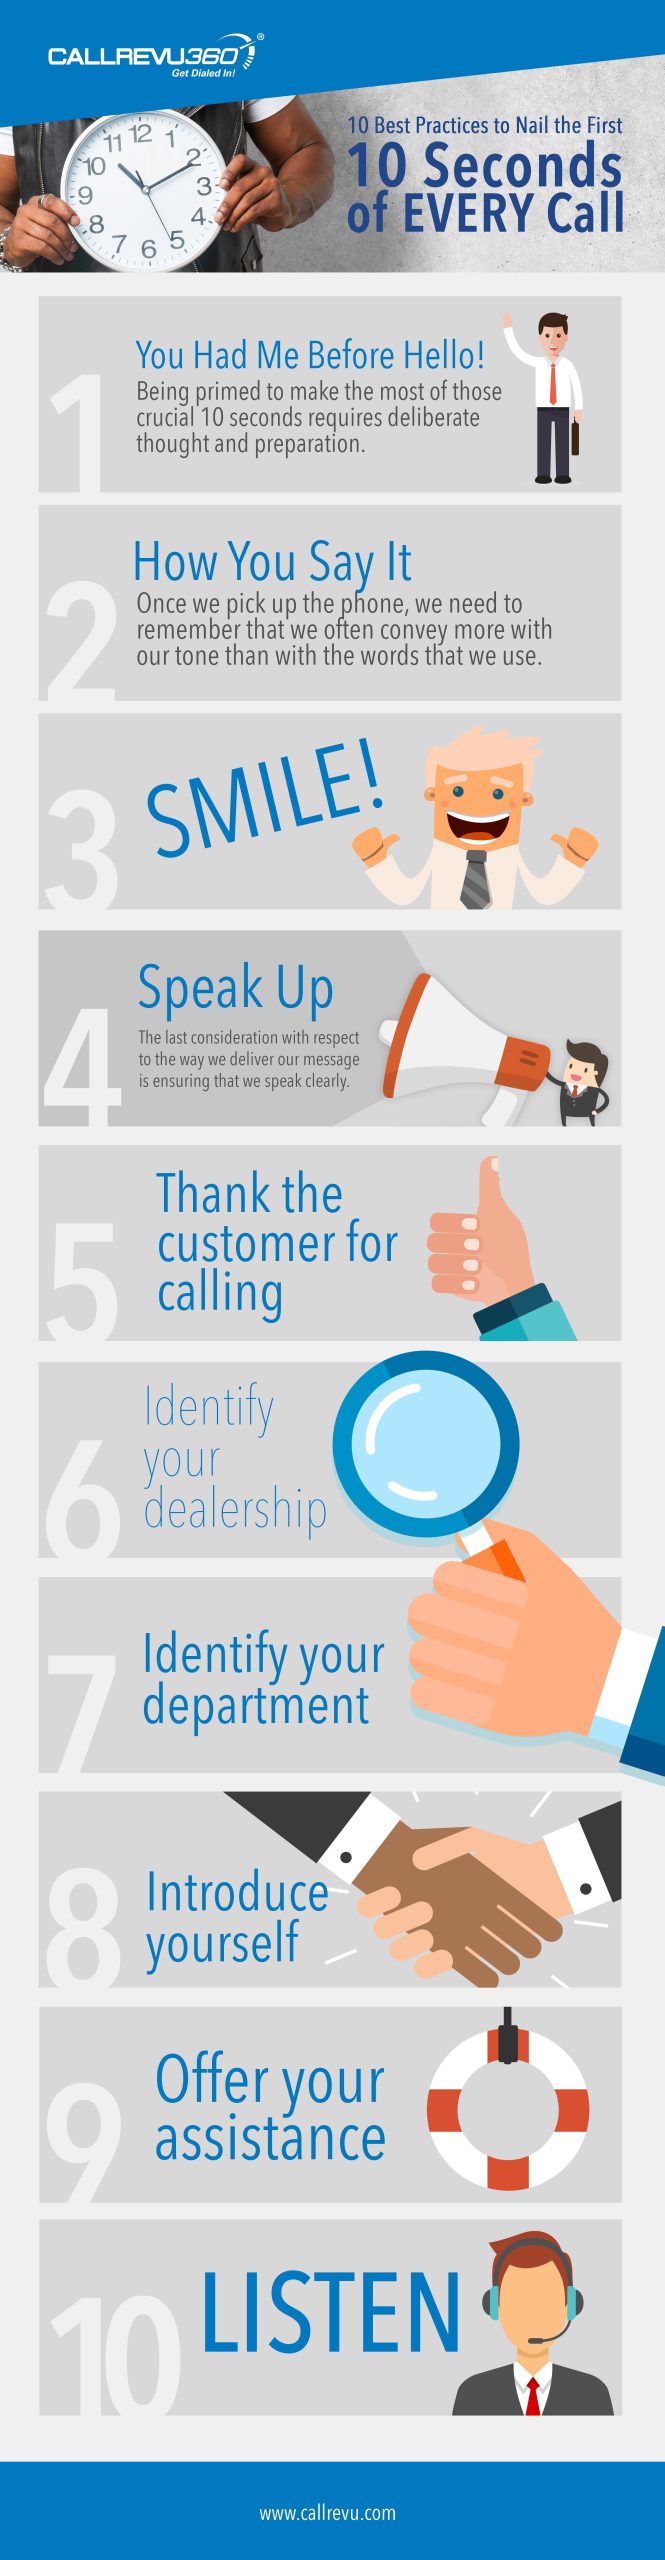 Infographic- Nail the First 10 Seconds of Every Call